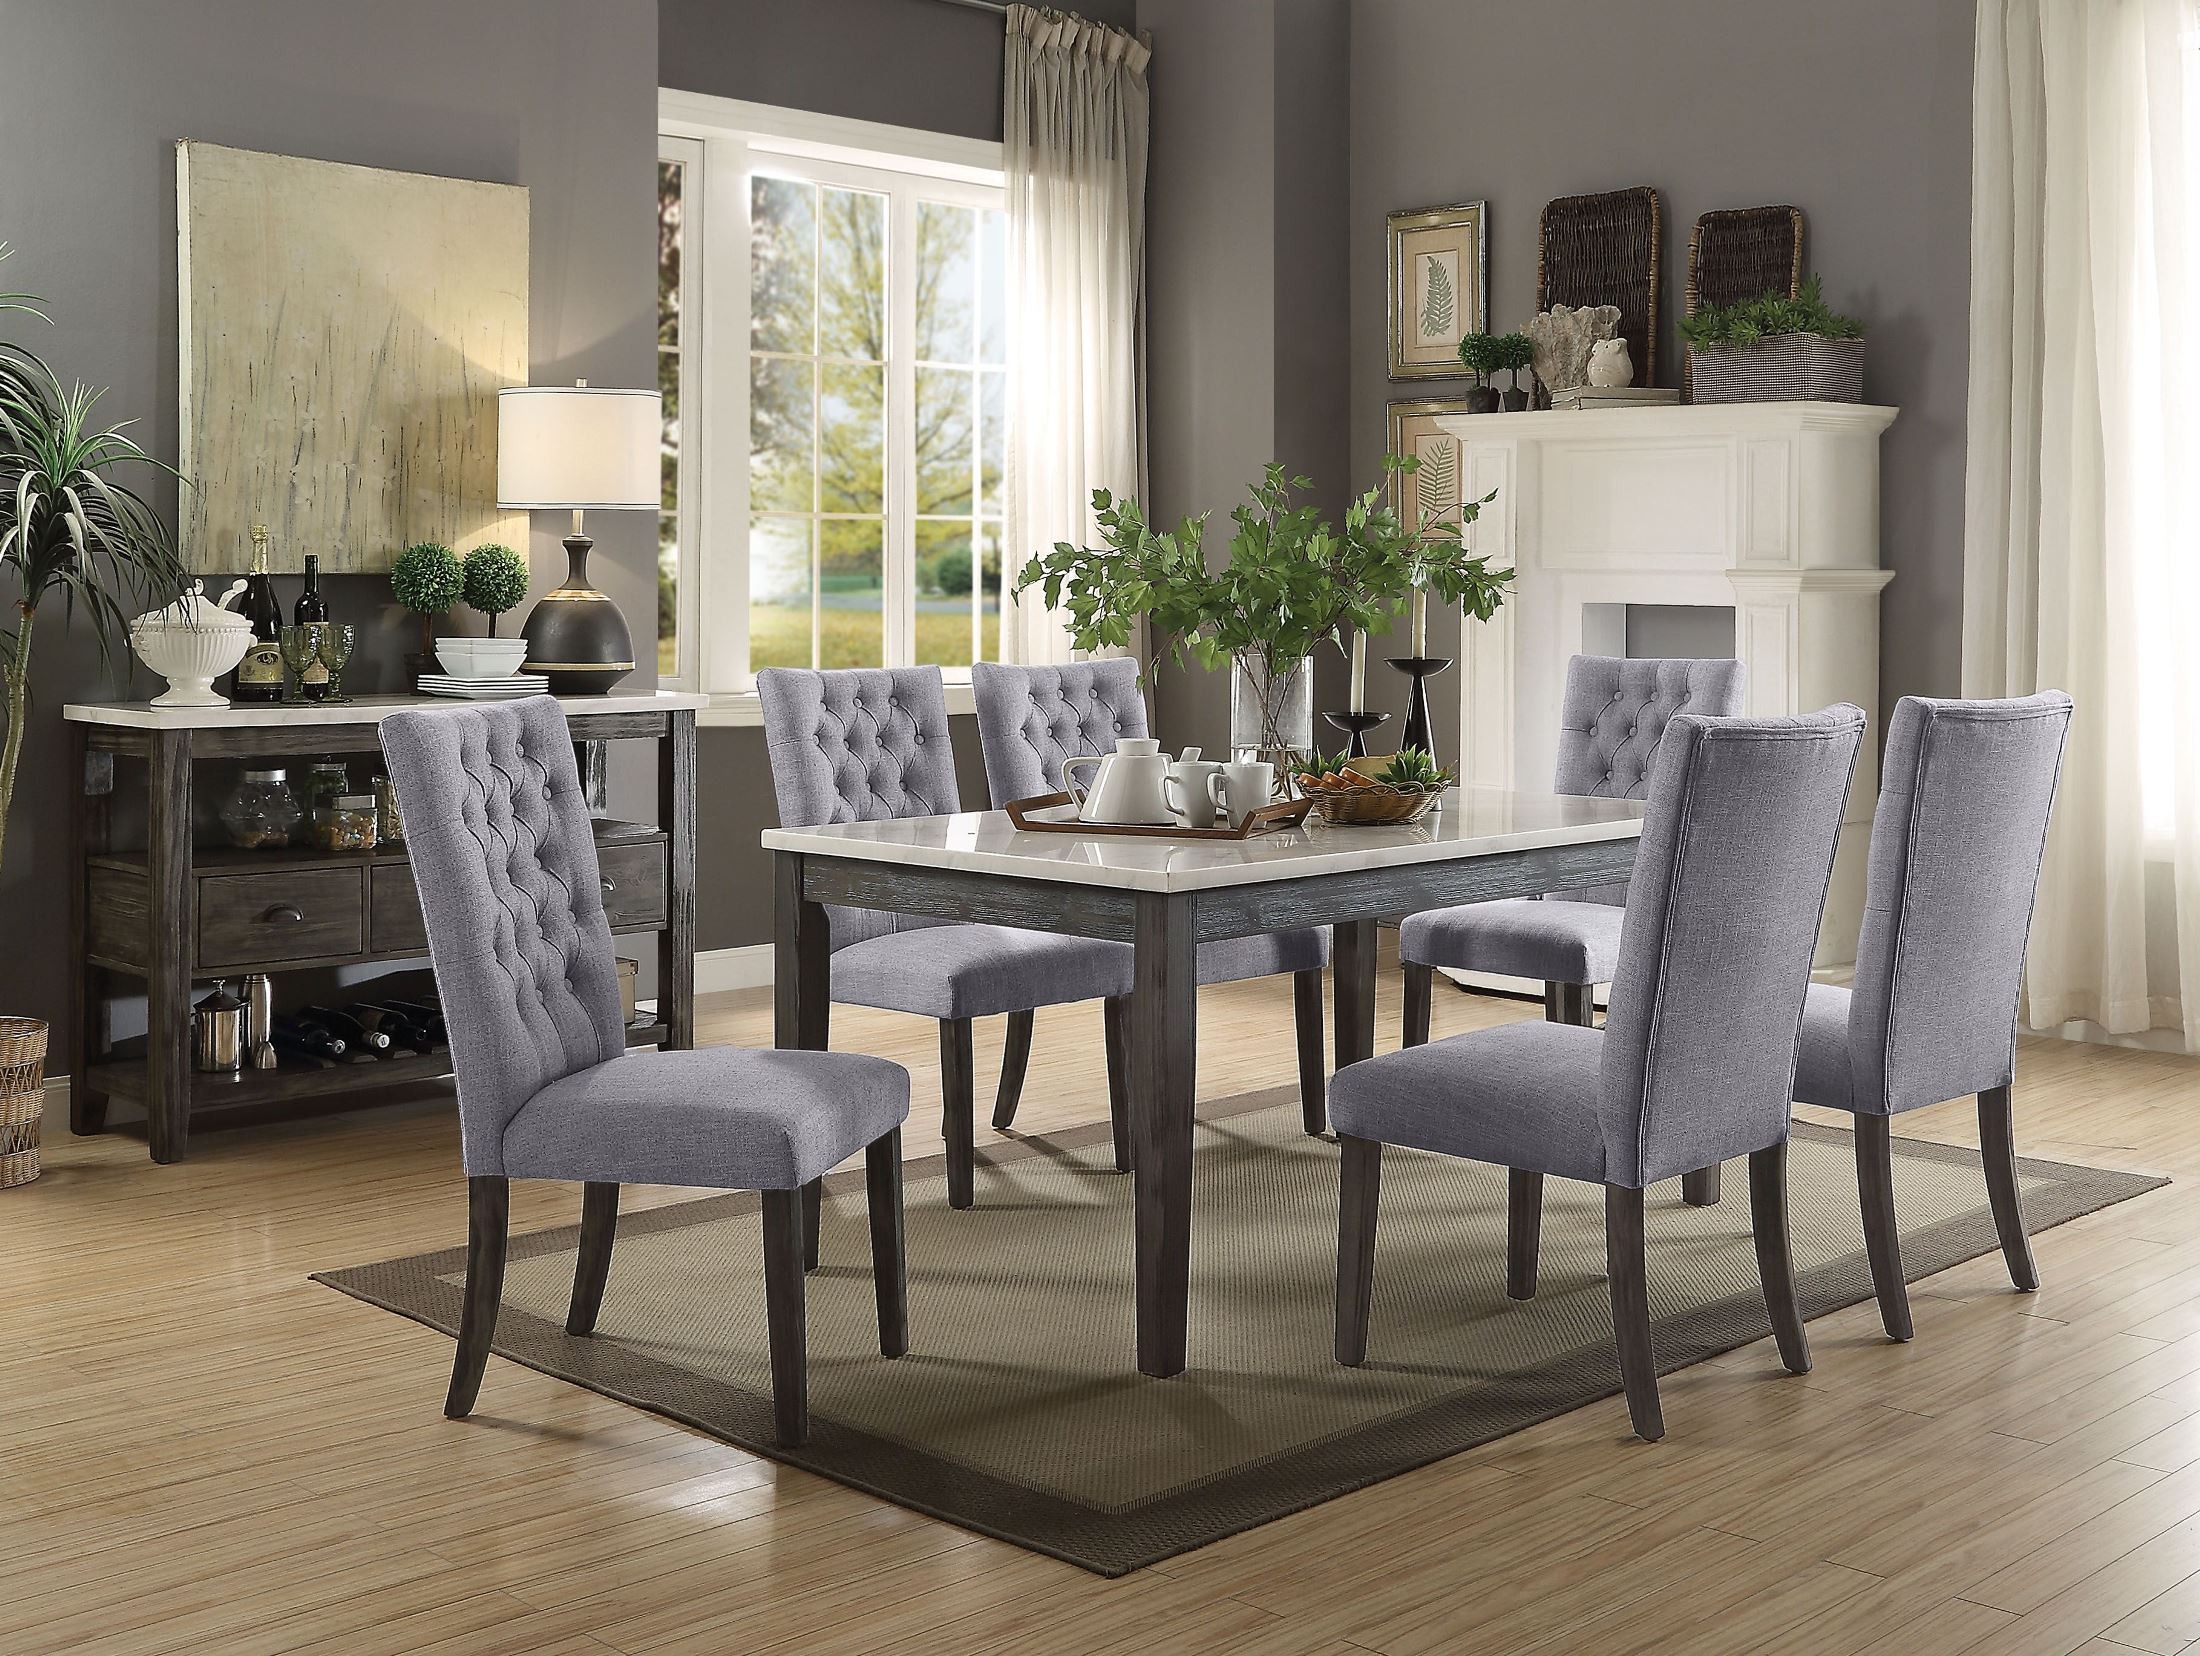 Merel White Marble and Gray Oak Dining Room Set ...